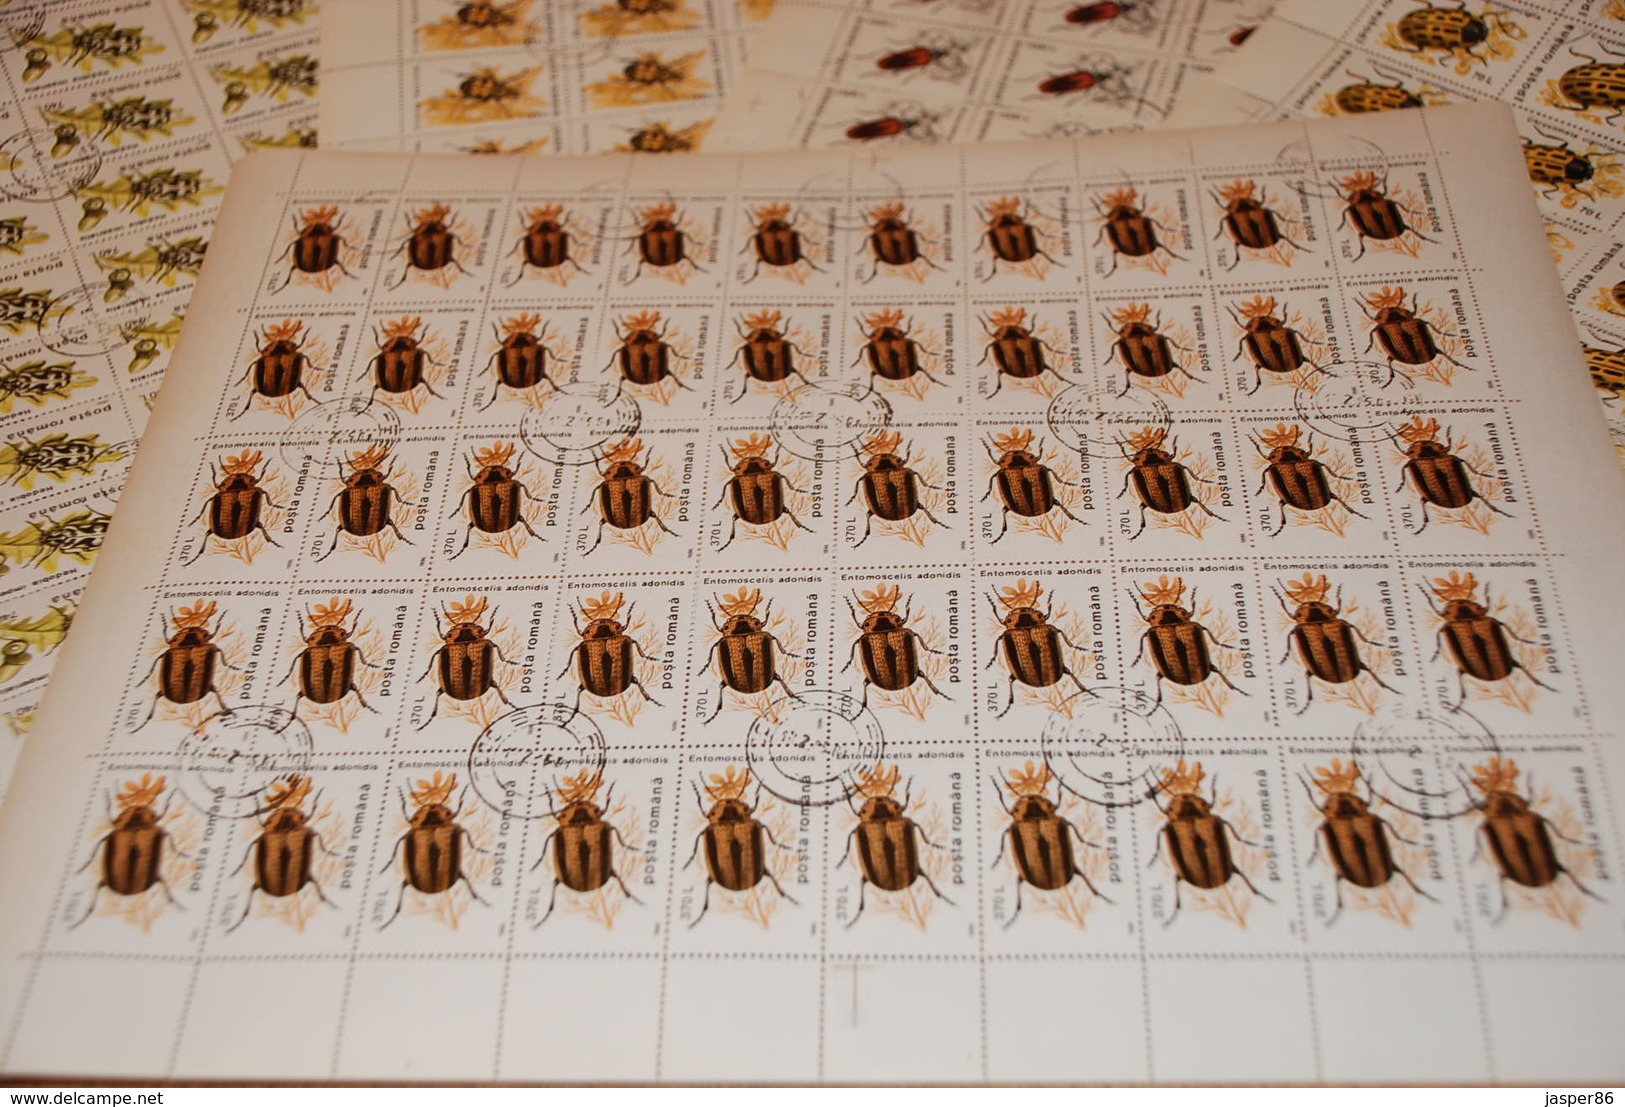 ROMANIA 500 Insects Sc 4082-4091, 50 X COMPLETE Sets WHOLESALE CV$112.50 - Full Sheets & Multiples